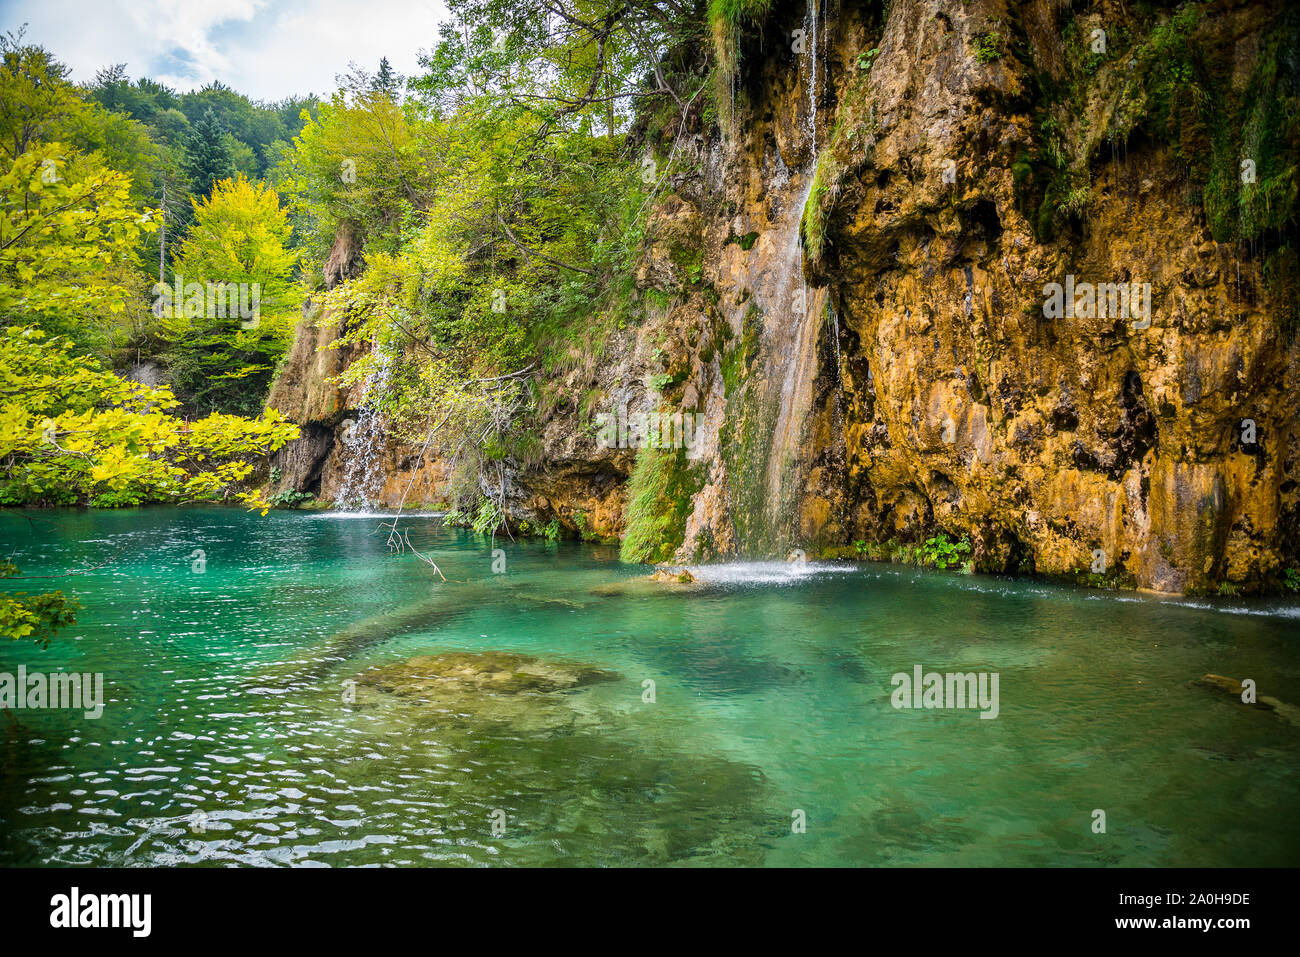 Amazing waterfalls with crystal clear water in the forest in Plitvice lakes National Park, Croatia. Nature landscape Stock Photo